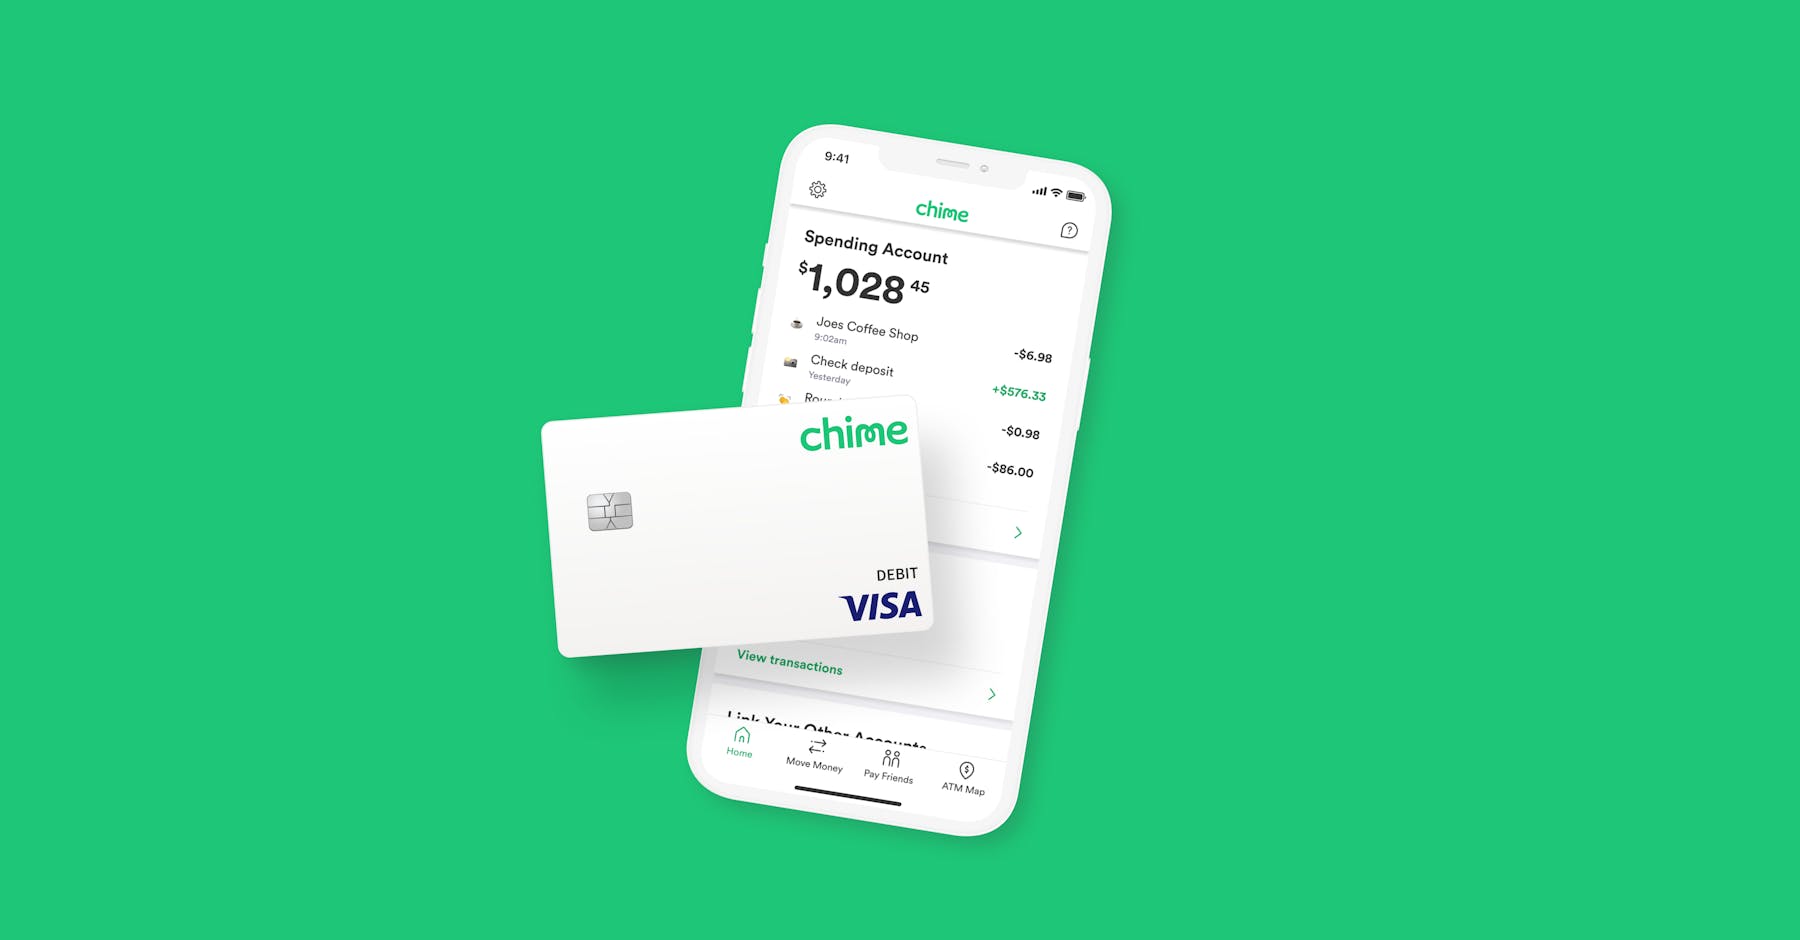 Lost Your Chime Card? Here's What To Do & How To Get Money